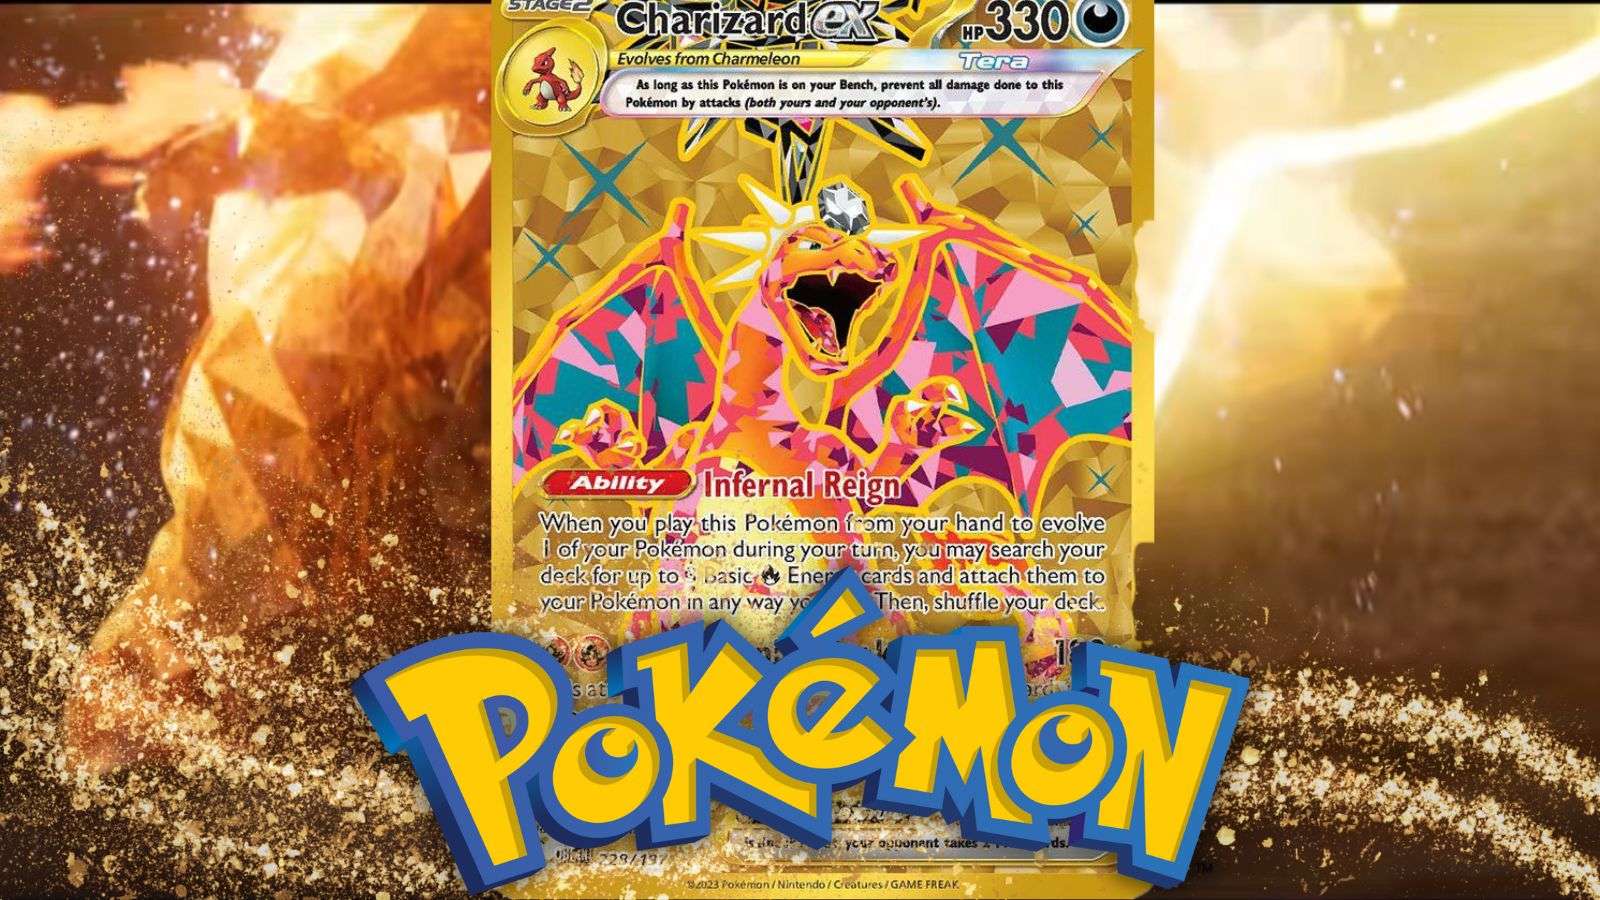 Golden Charizard ex against a Charizard background